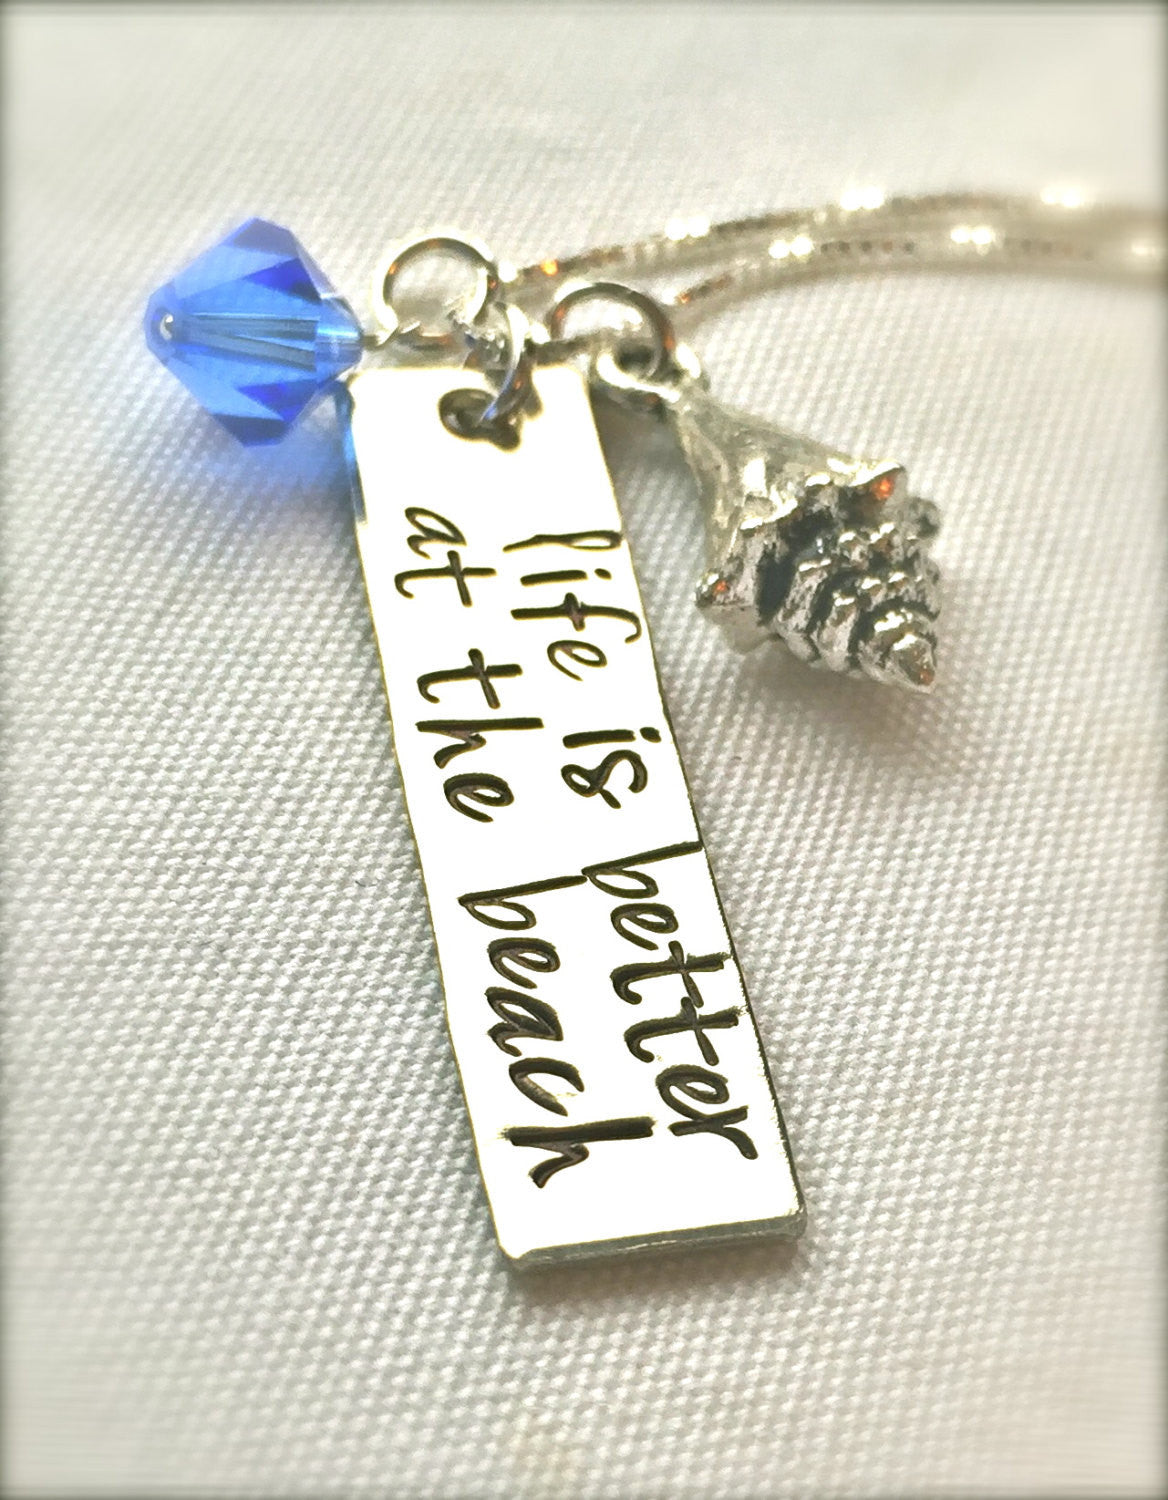 Life Is Better At The Beach Necklace, Mother's Day Gifts, Graduation Gift, Hawaiian Jewelry, Hand Stamped Necklace, Girlfriend, natashaaloha - Natashaaloha, jewelry, bracelets, necklace, keychains, fishing lures, gifts for men, charms, personalized, 